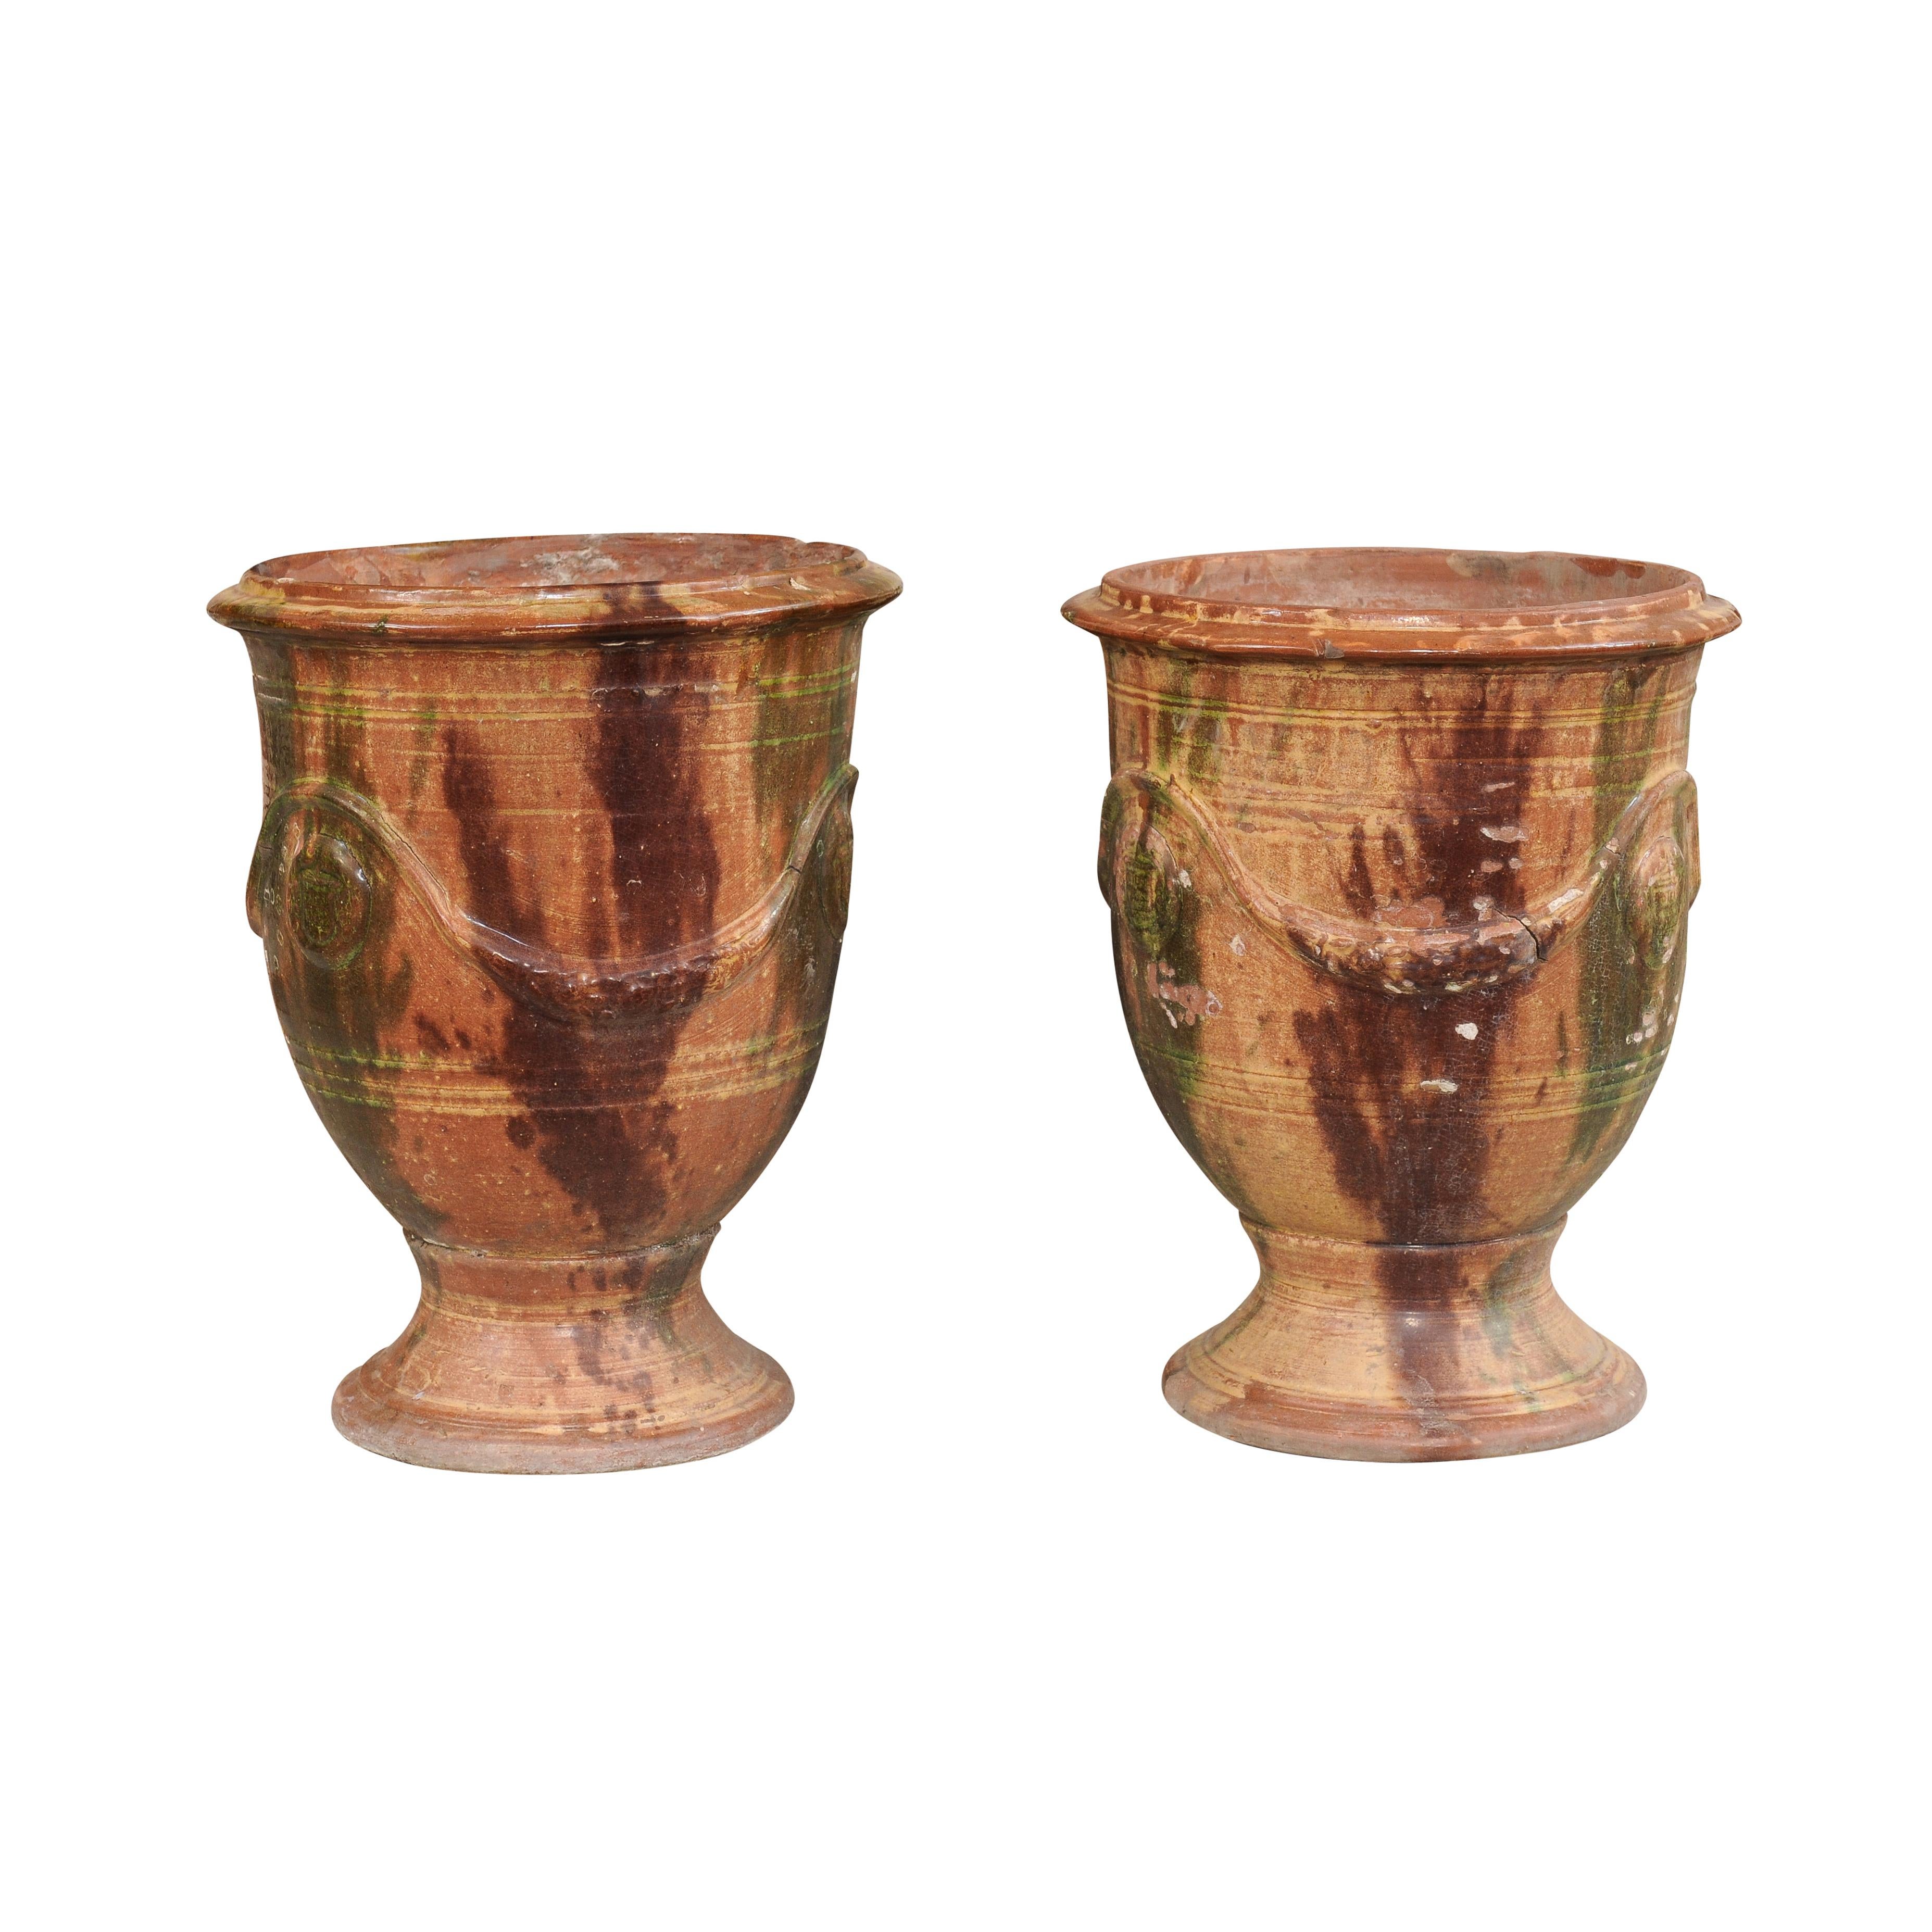 A pair of French Anduze jars from the 19th century with dark brown and green drip glaze and swag decoration in raised relief. Elevate your outdoor space with this captivating pair of 19th-century French Anduze jars. These jars feature a combination